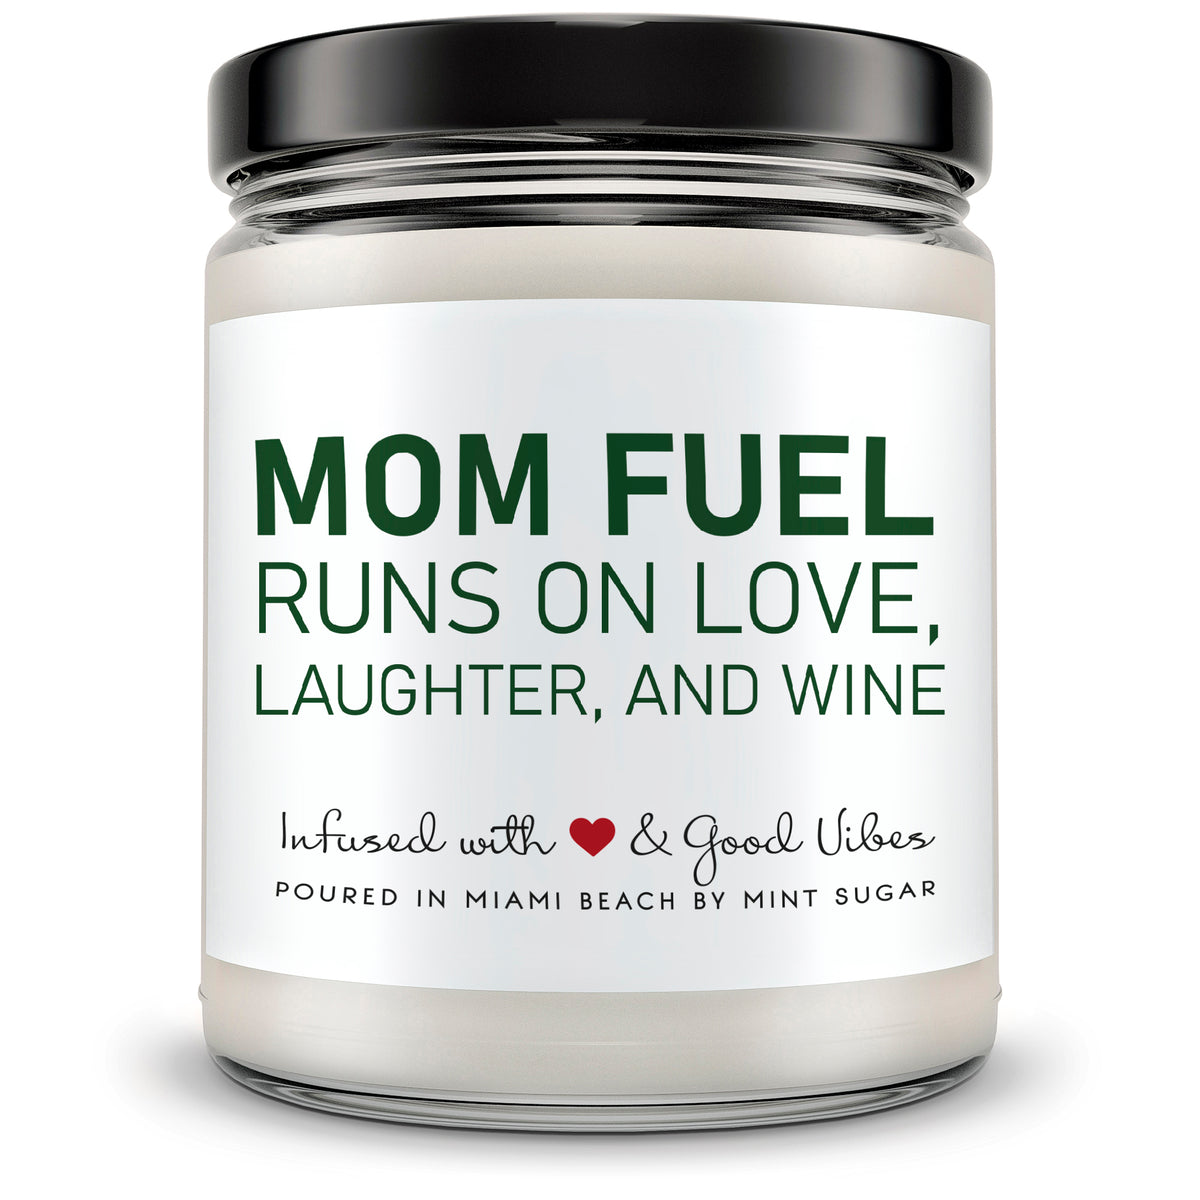 Mom Fuel Runs On Love, Laughter and Wine - Mint Sugar Candle